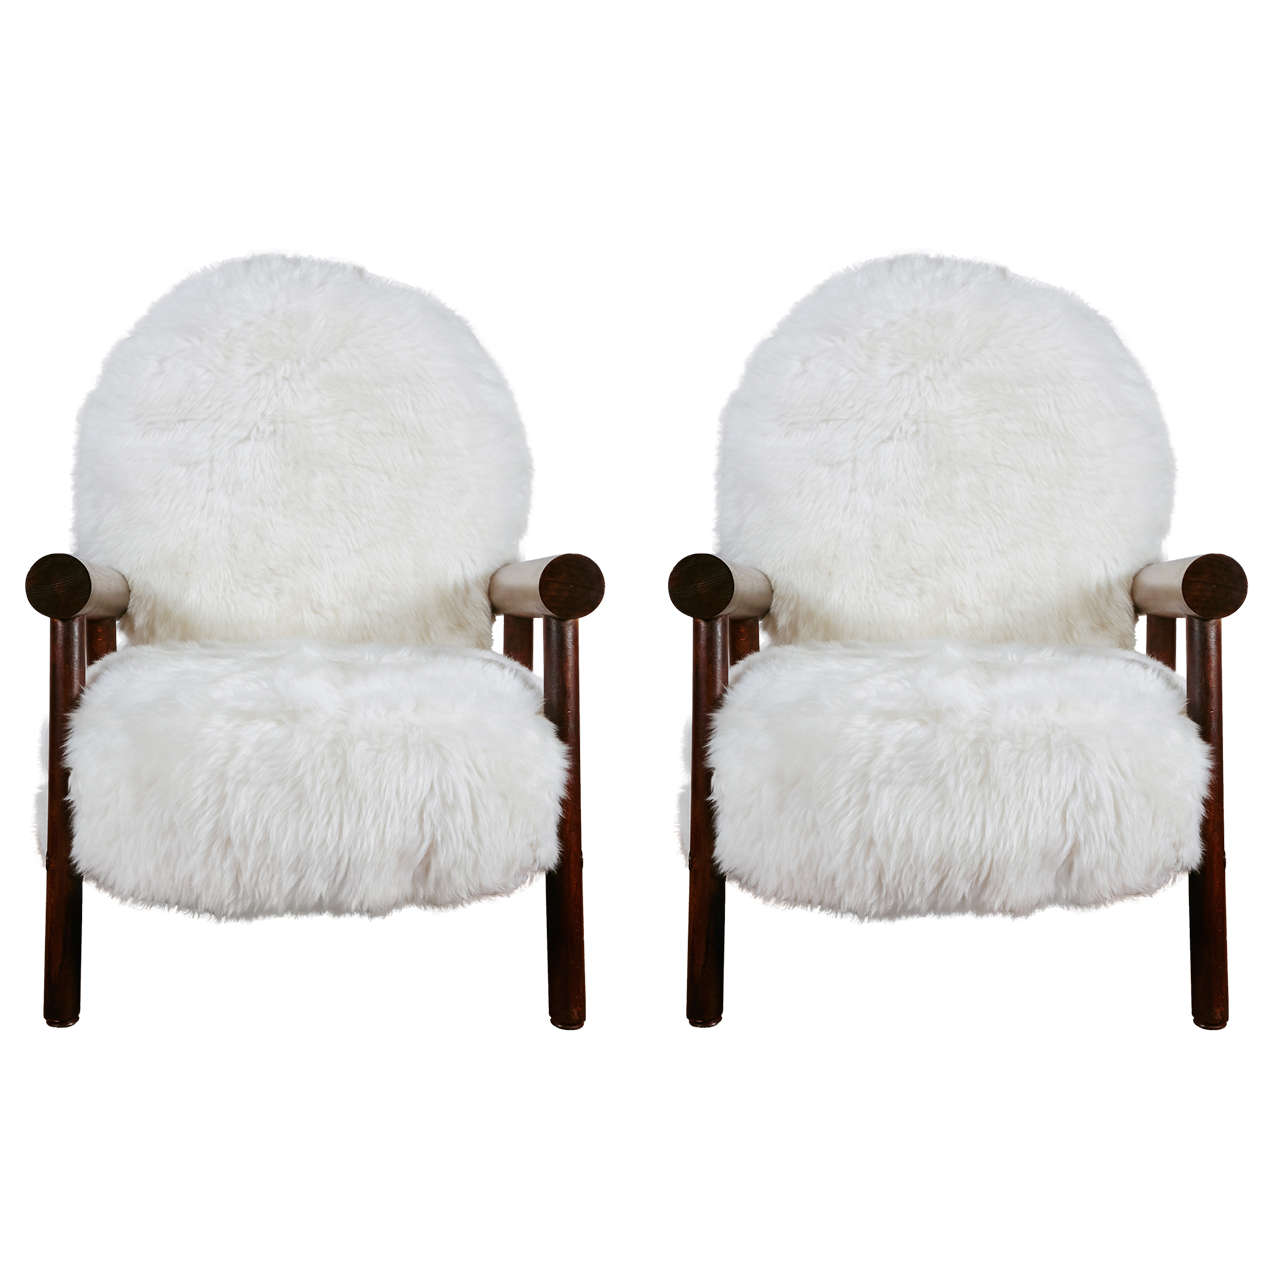 Great Pair of "Mountain" Chairs Upholstered with Sheep Skins